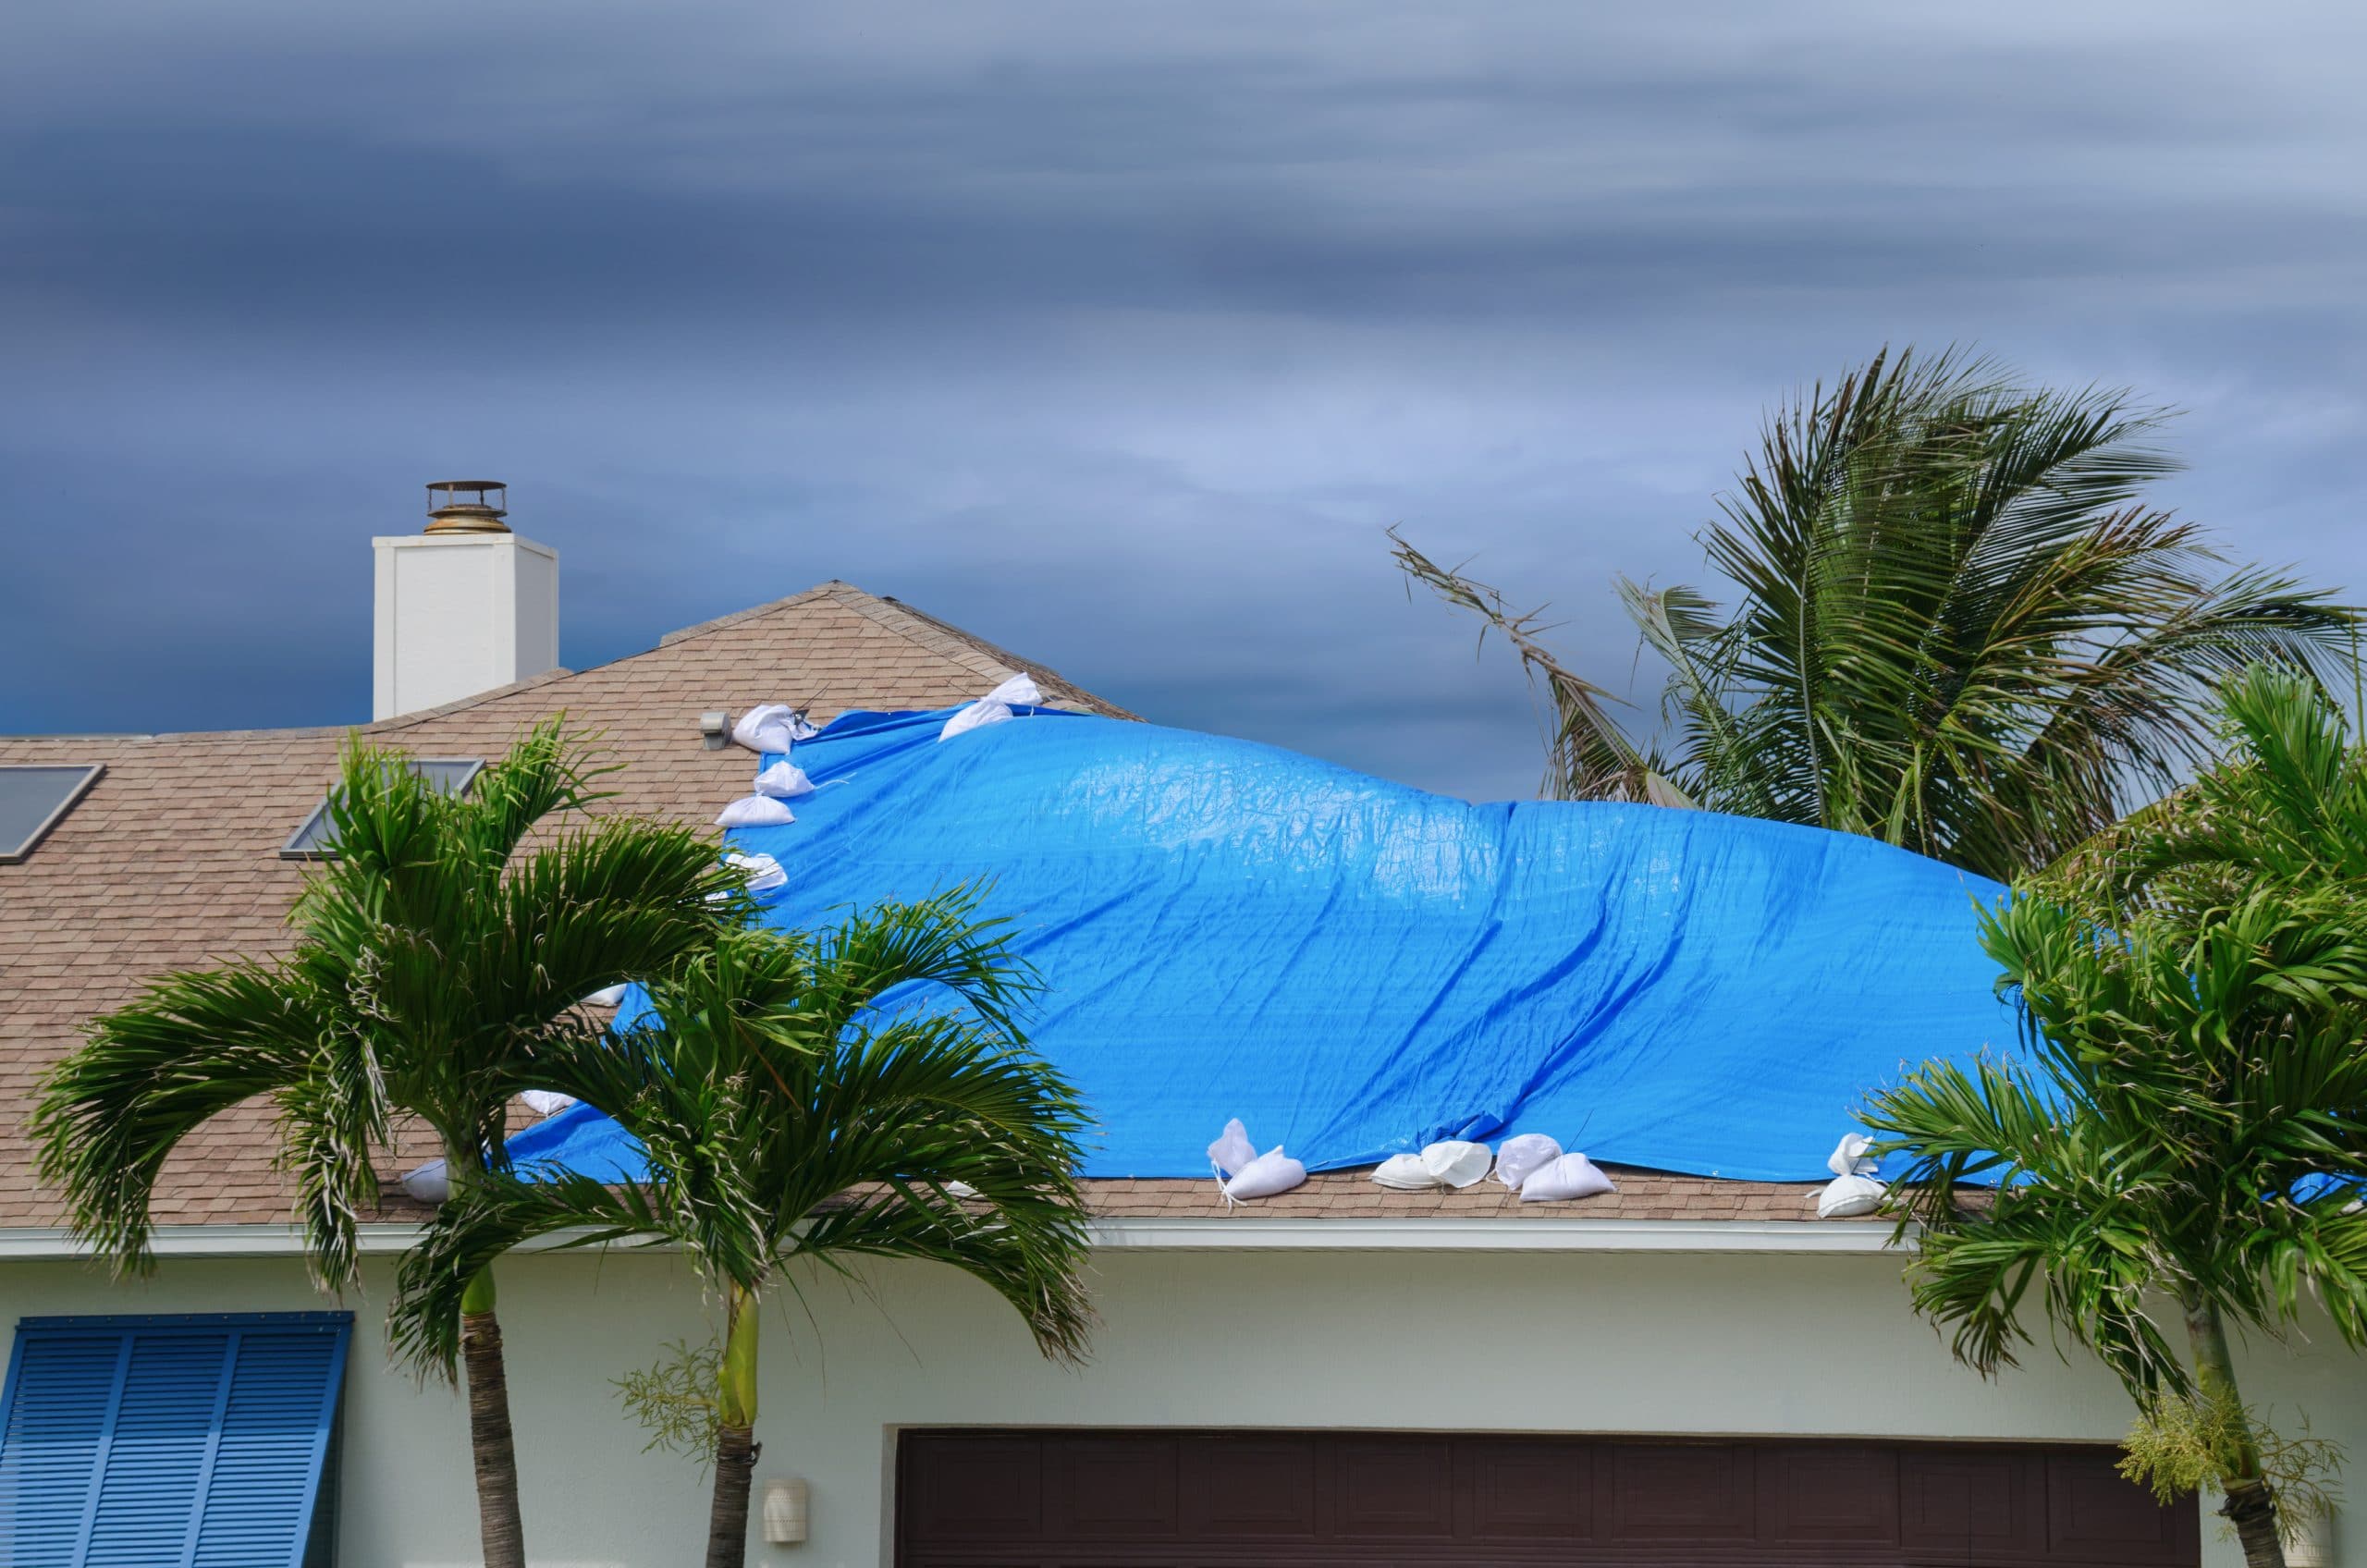 Roof Inspection in Tucson and the Surrounding Areas Storm damage specialist